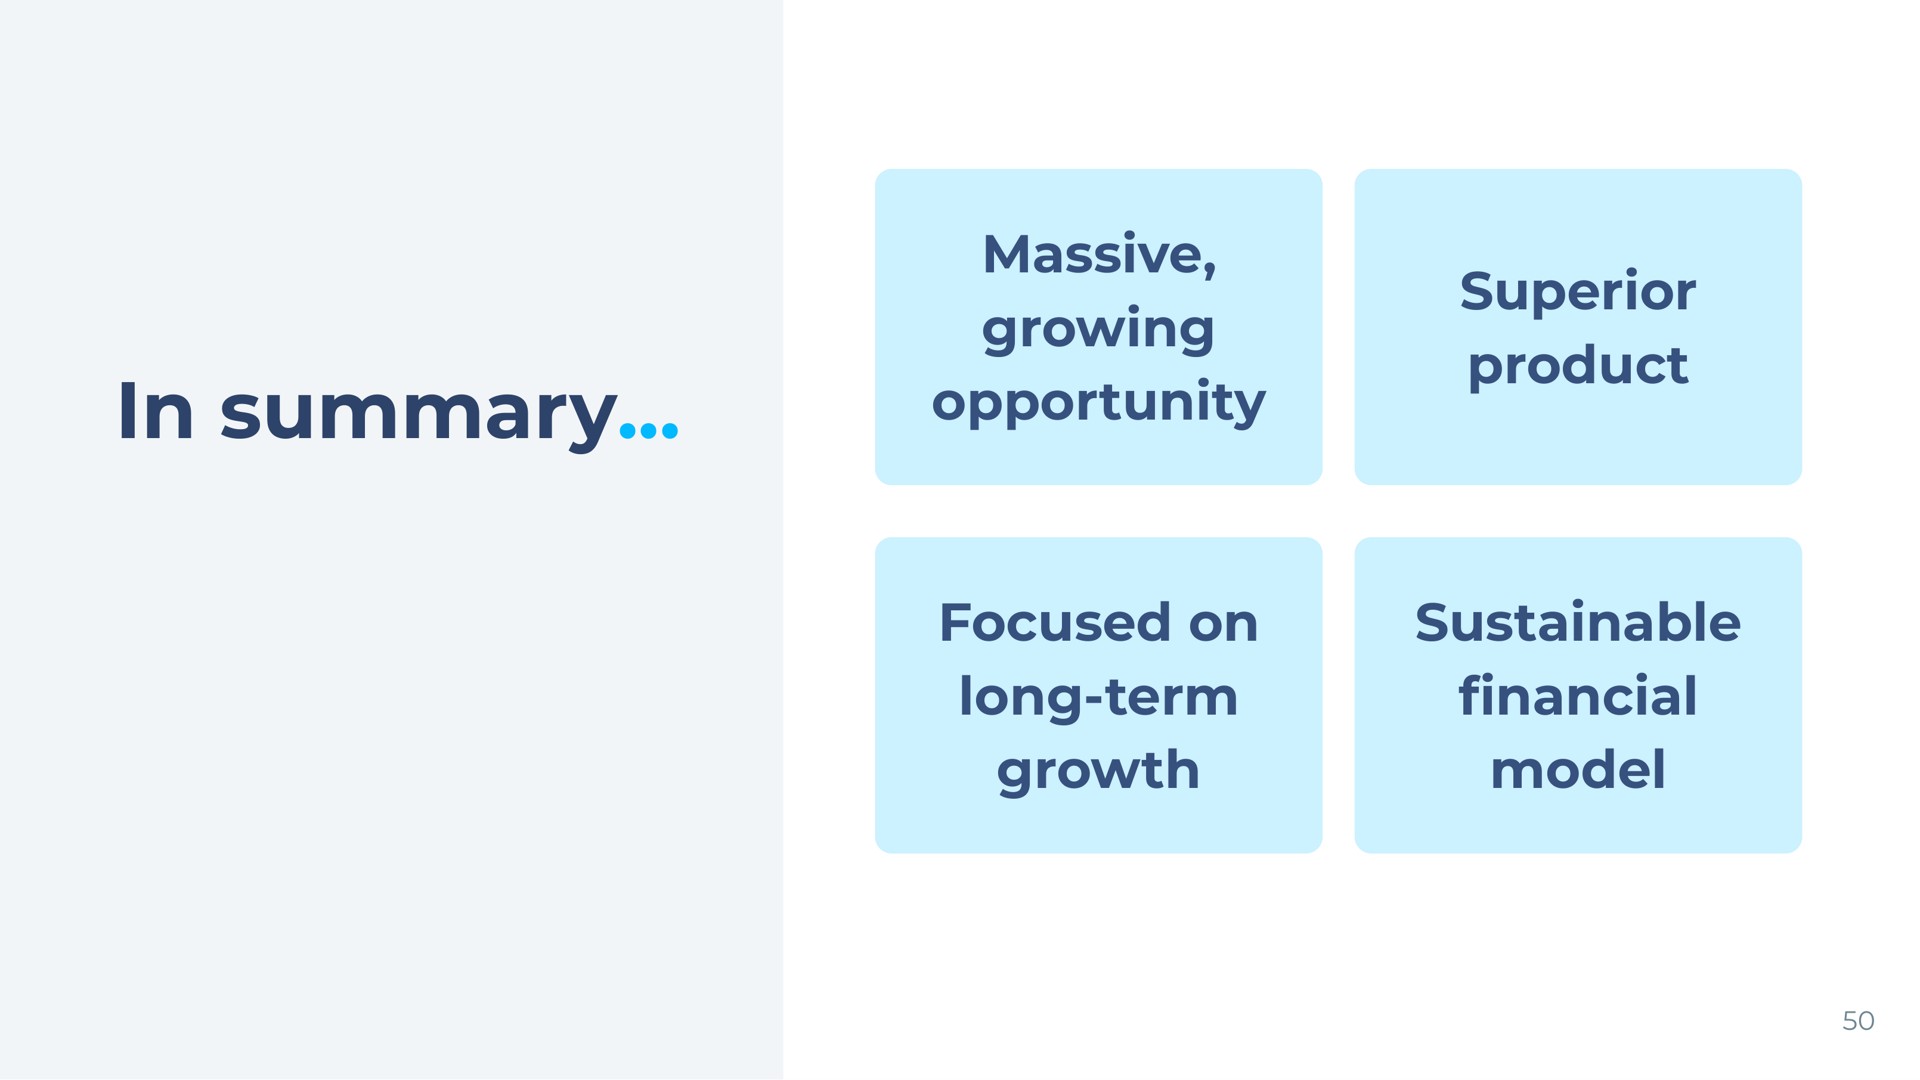 in summary massive growing opportunity superior product focused on long term growth sustainable model financial | Wise